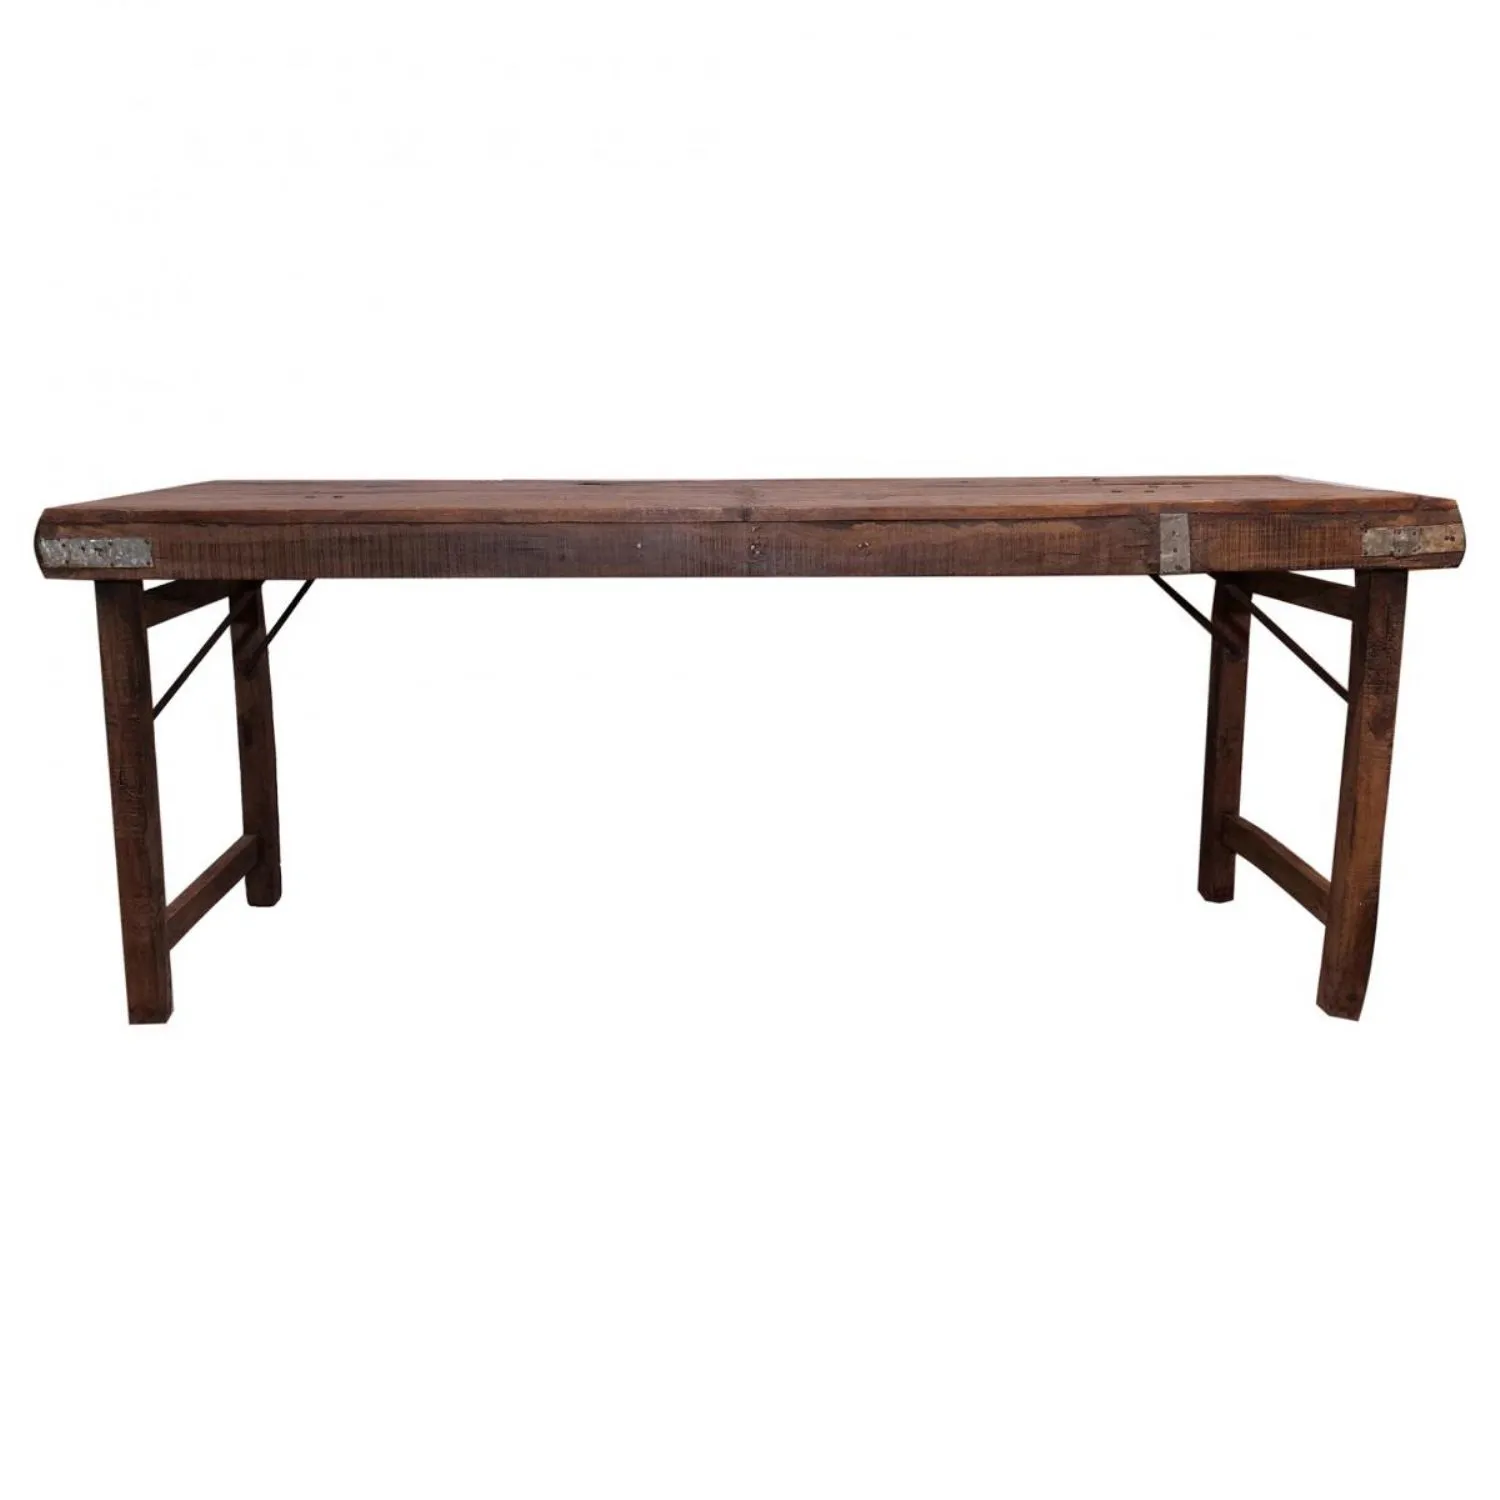 1.8m Folding Wooden Table